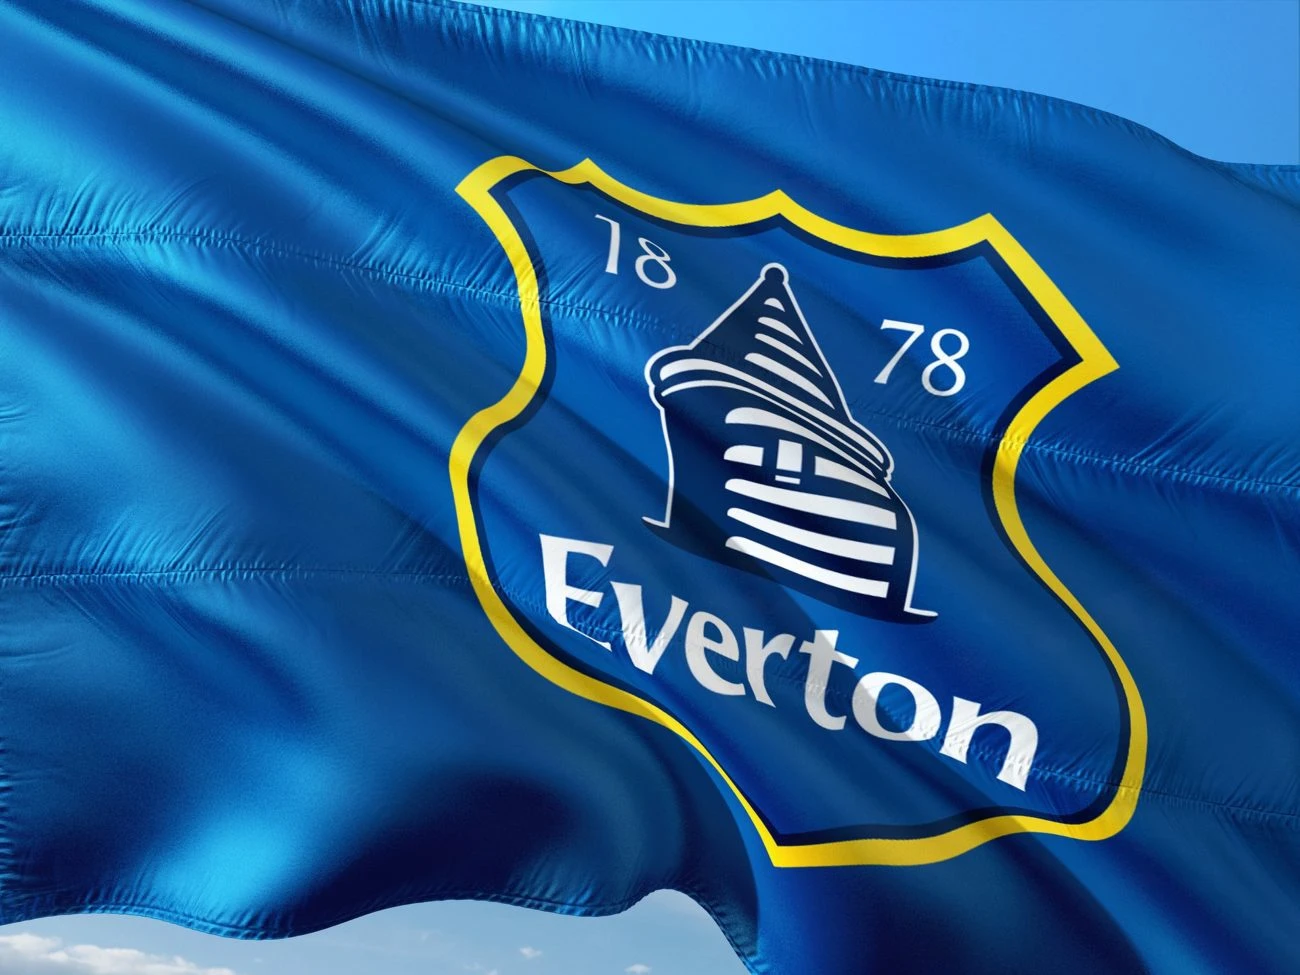 Everton announced betting partnership with i8.Bet